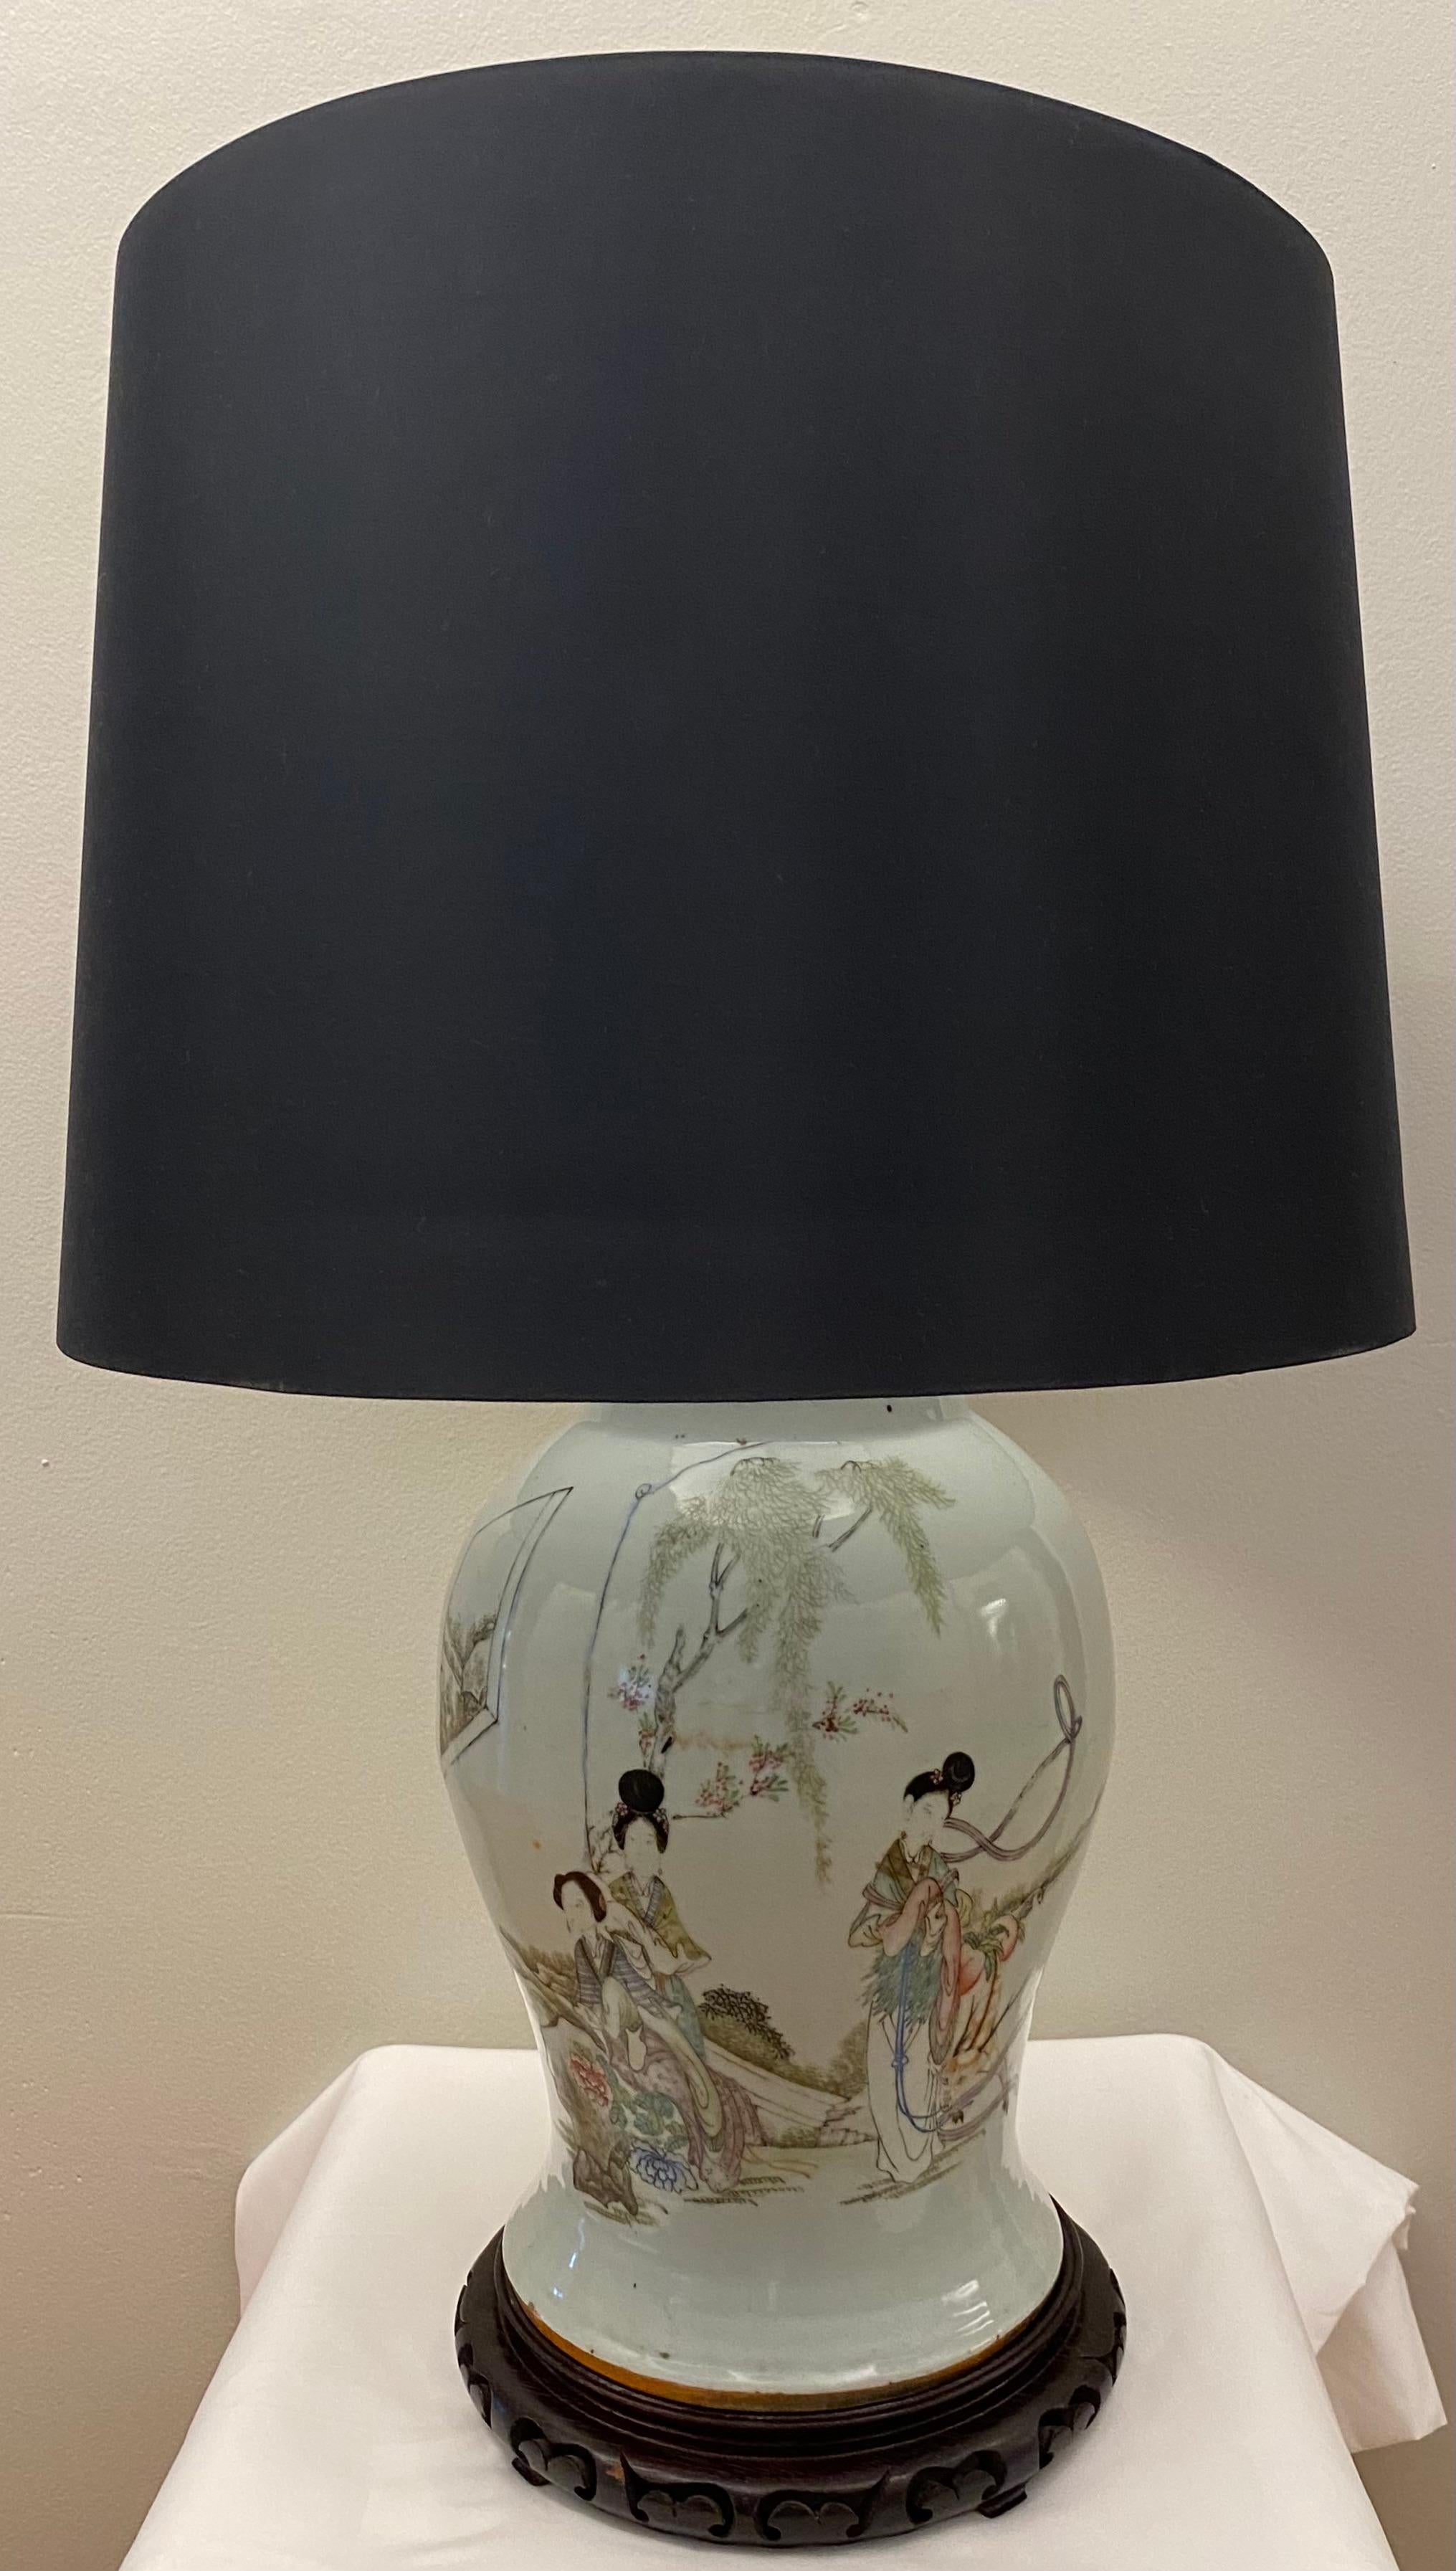 Rare Large 19th Century Chinese Porcelain Pale Blue Bulbous Vase Lamp In Good Condition For Sale In Miami, FL